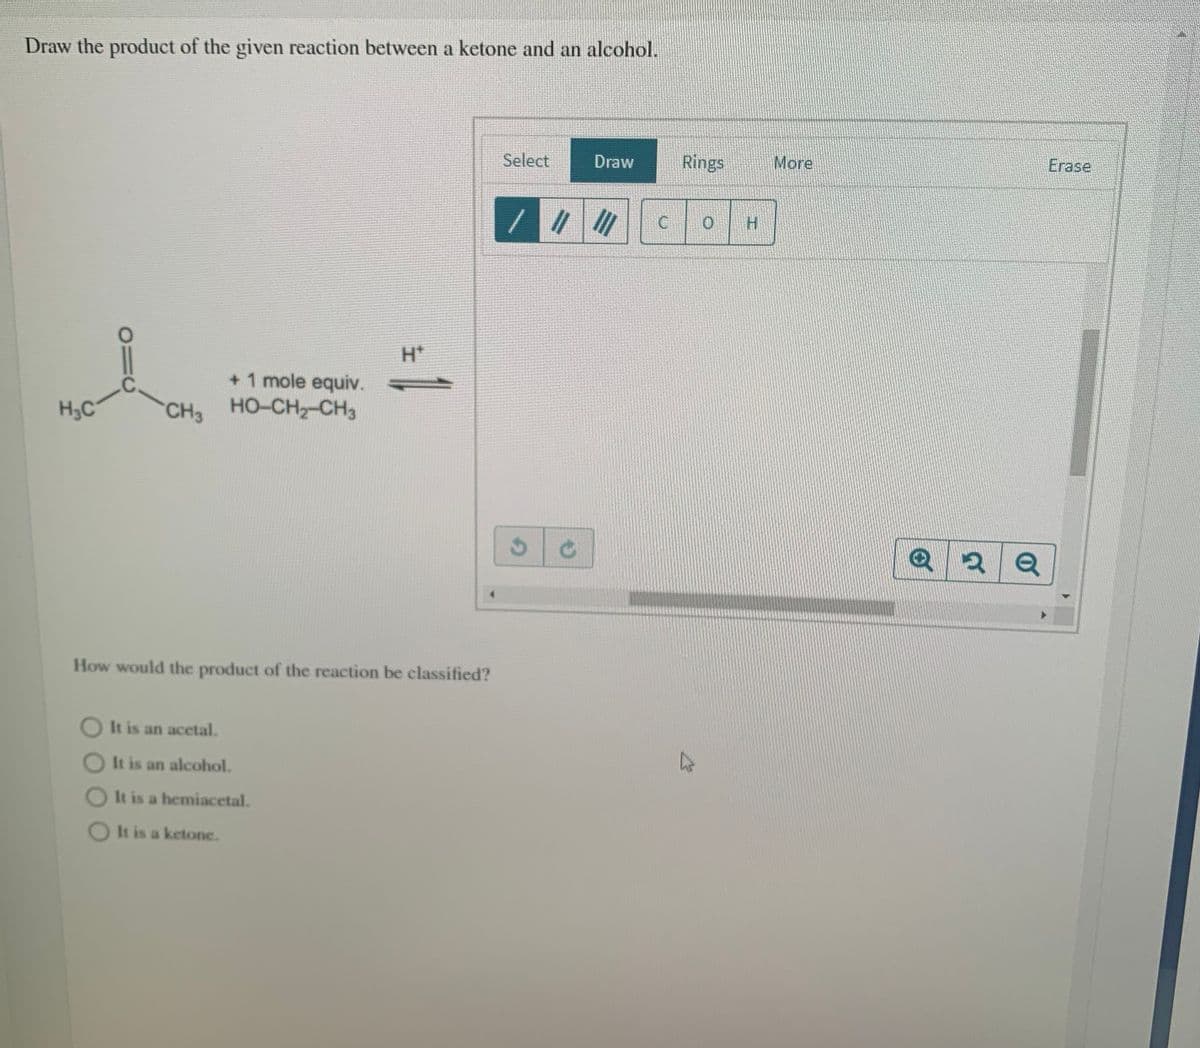 Draw the product of the given reaction between a ketone and an alcohol.
Select
Draw
Rings
More
Erase
//
H.
C
H*
+ 1 mole equiv.
HO-CH2-CH3
.C.
H3C
CH3
How would the product of the reaction be classified?
O It is an acetal.
It is an alcohol.
It is a hemiacetal.
It is a ketone.
